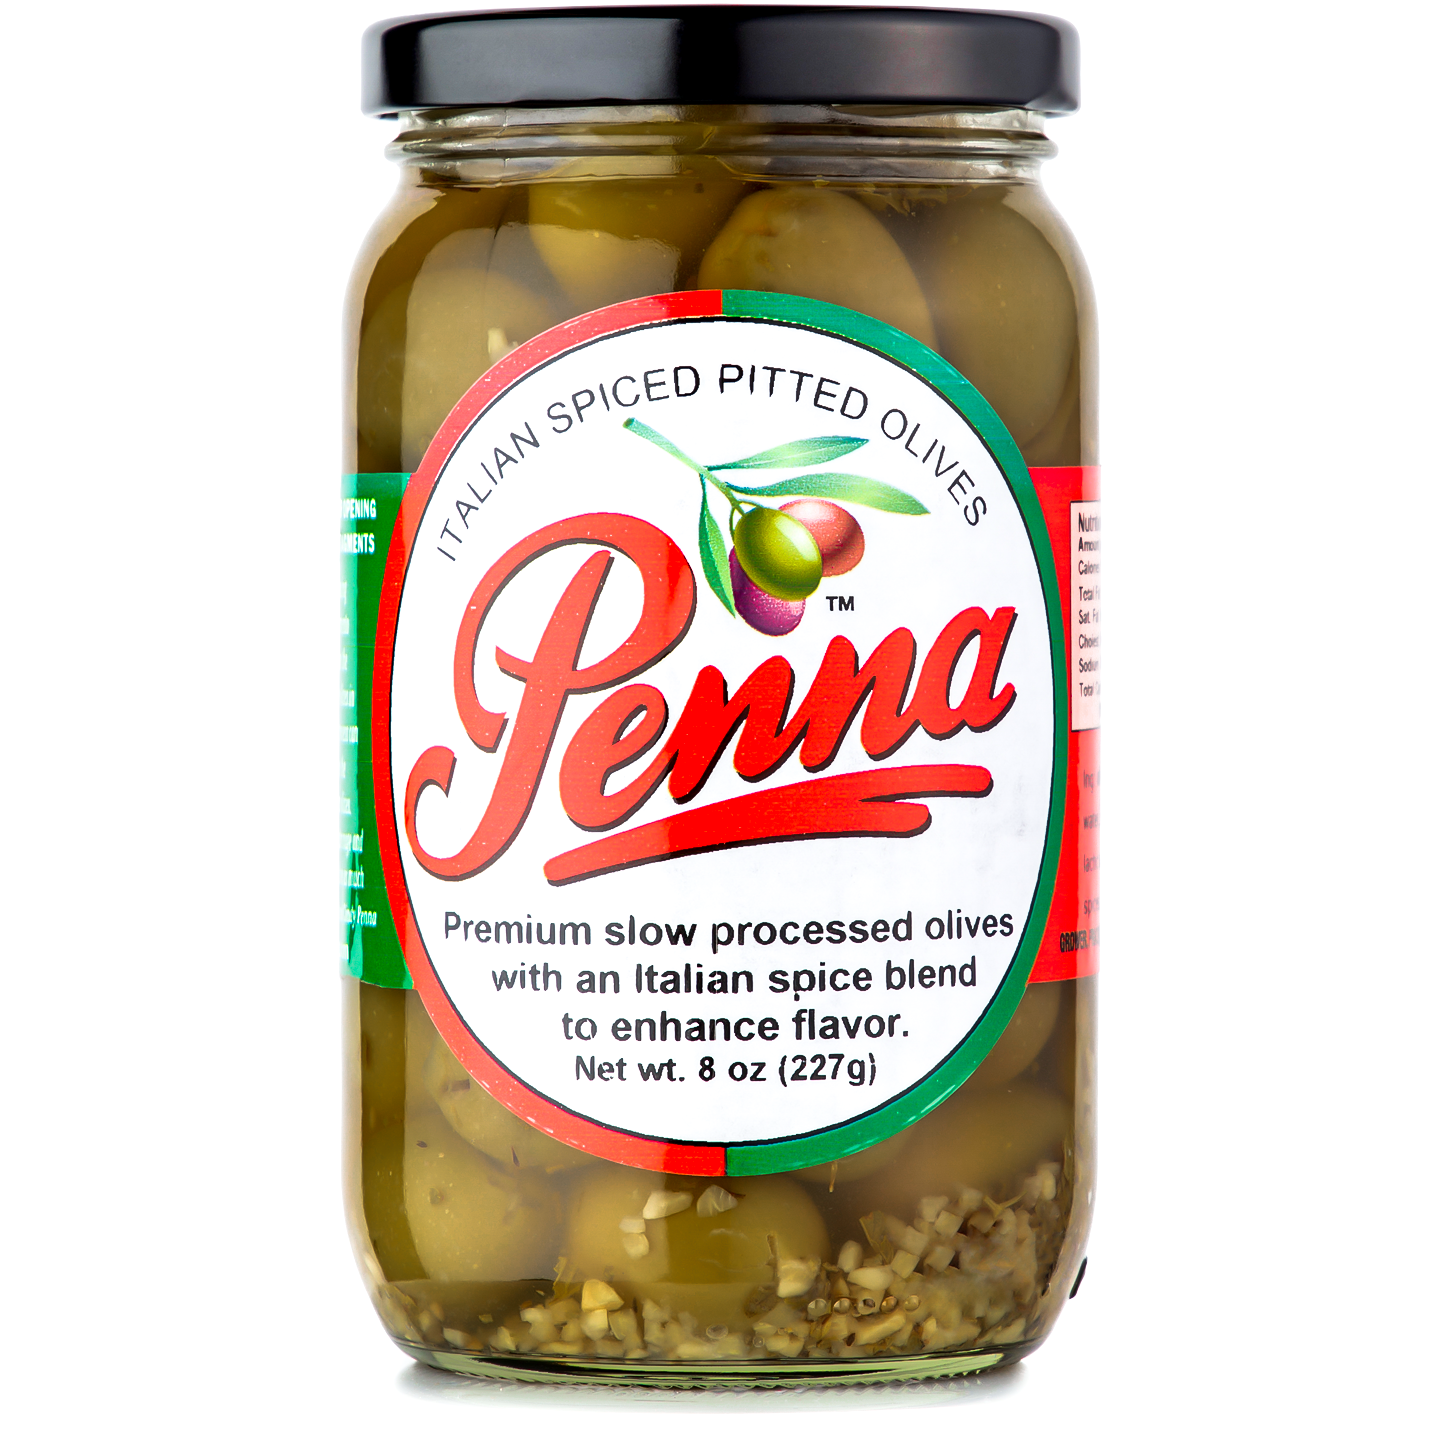 Italian Spiced Pitted Olives (Case of 12)